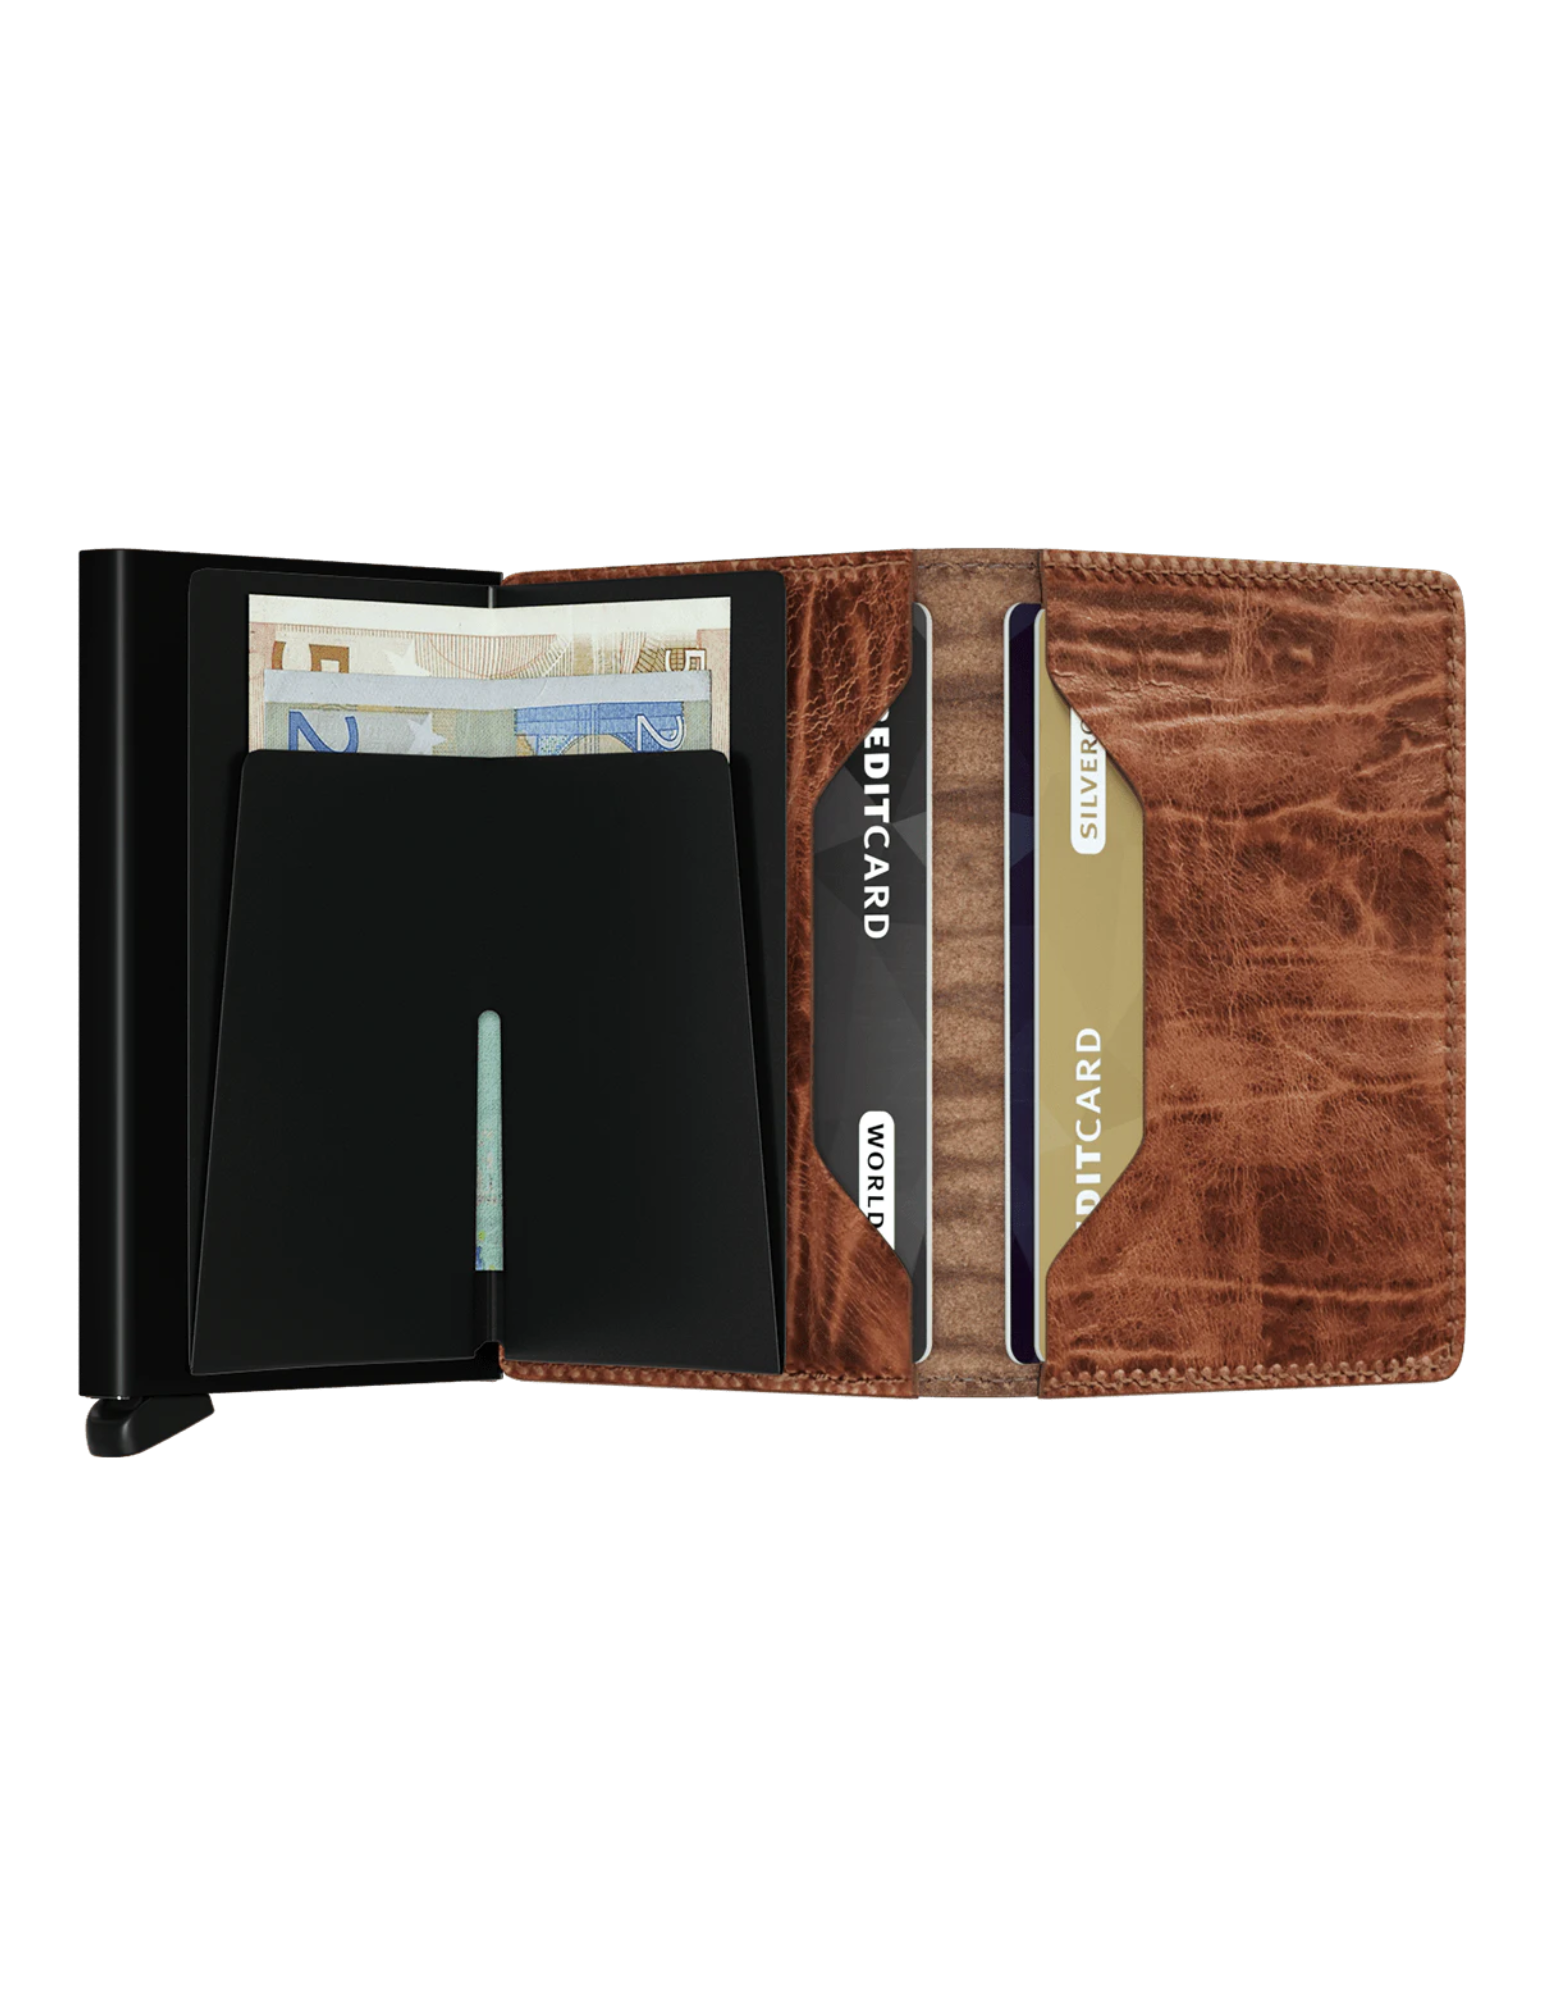 Its slim profile makes the Slimwallet fit perfectly into every pocket. The open exterior is cut extra wide to hold cards, banknotes and receipts. The Cardprotector mechanism allows you to slide out cards with one simple motion, while the aluminium protects your cards from bending, breaking and unwanted wireless communication.